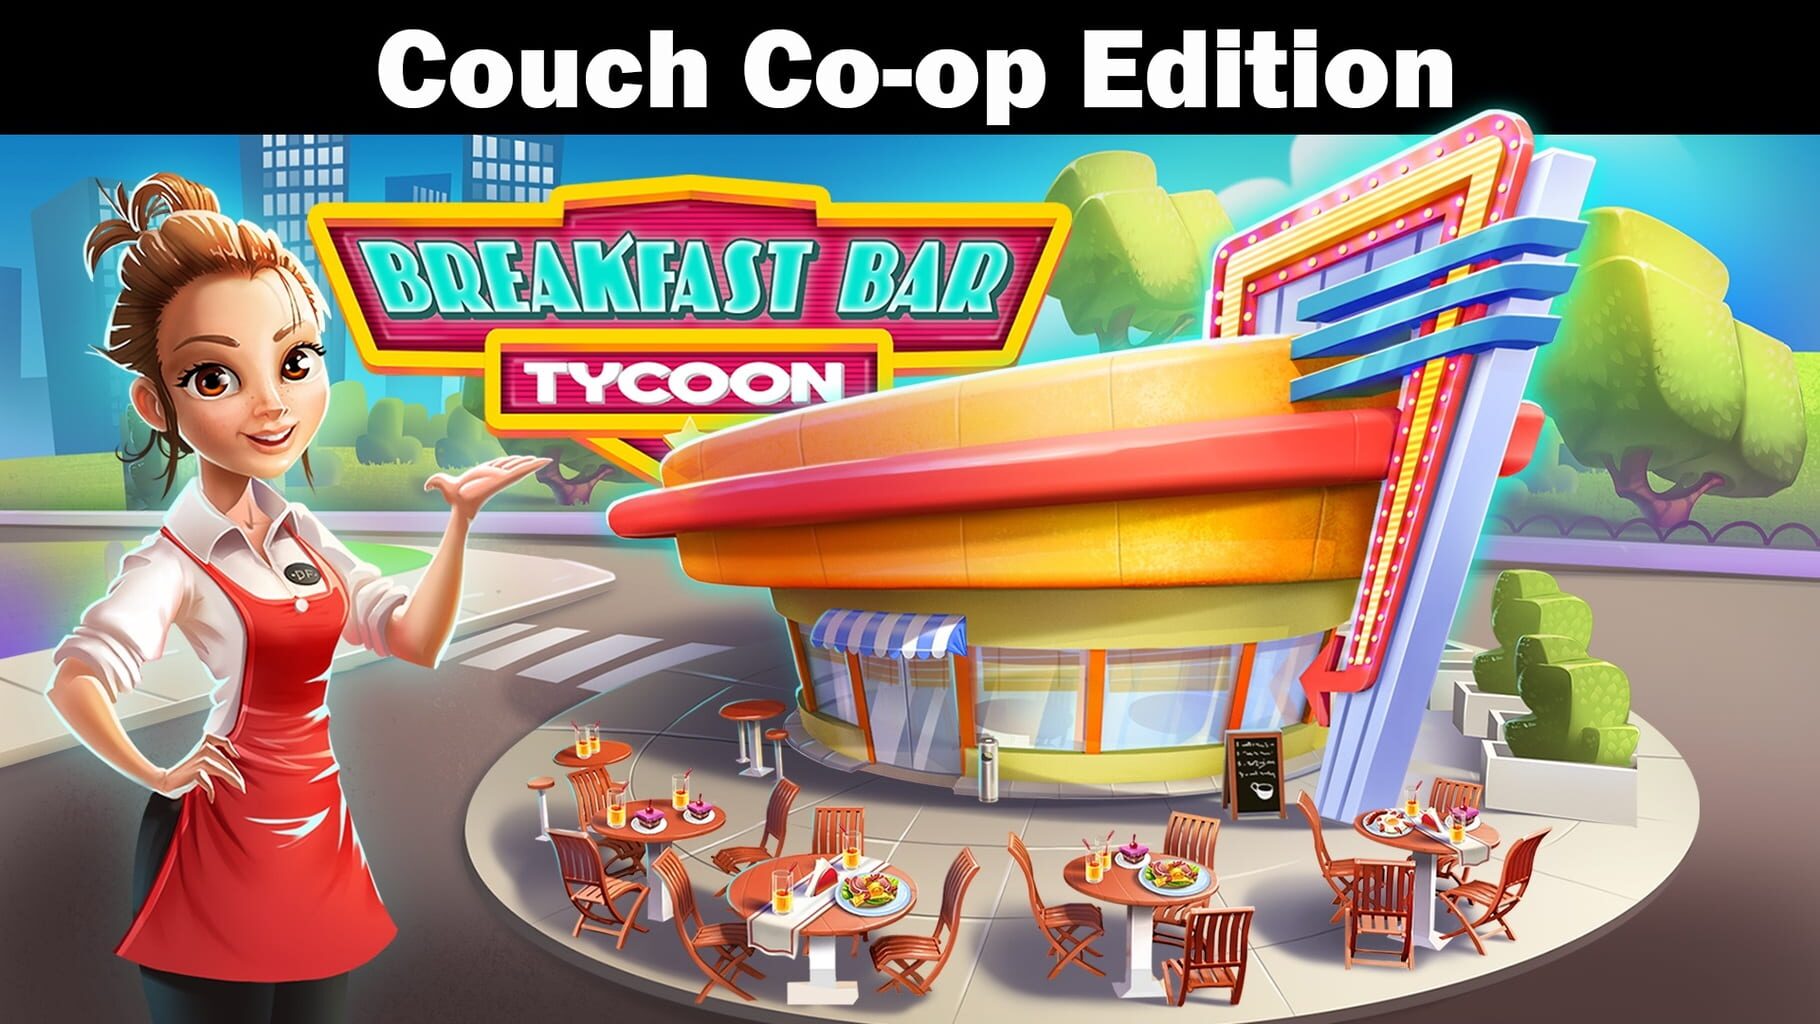 Breakfast Bar Tycoon: Couch Co-op Edition artwork